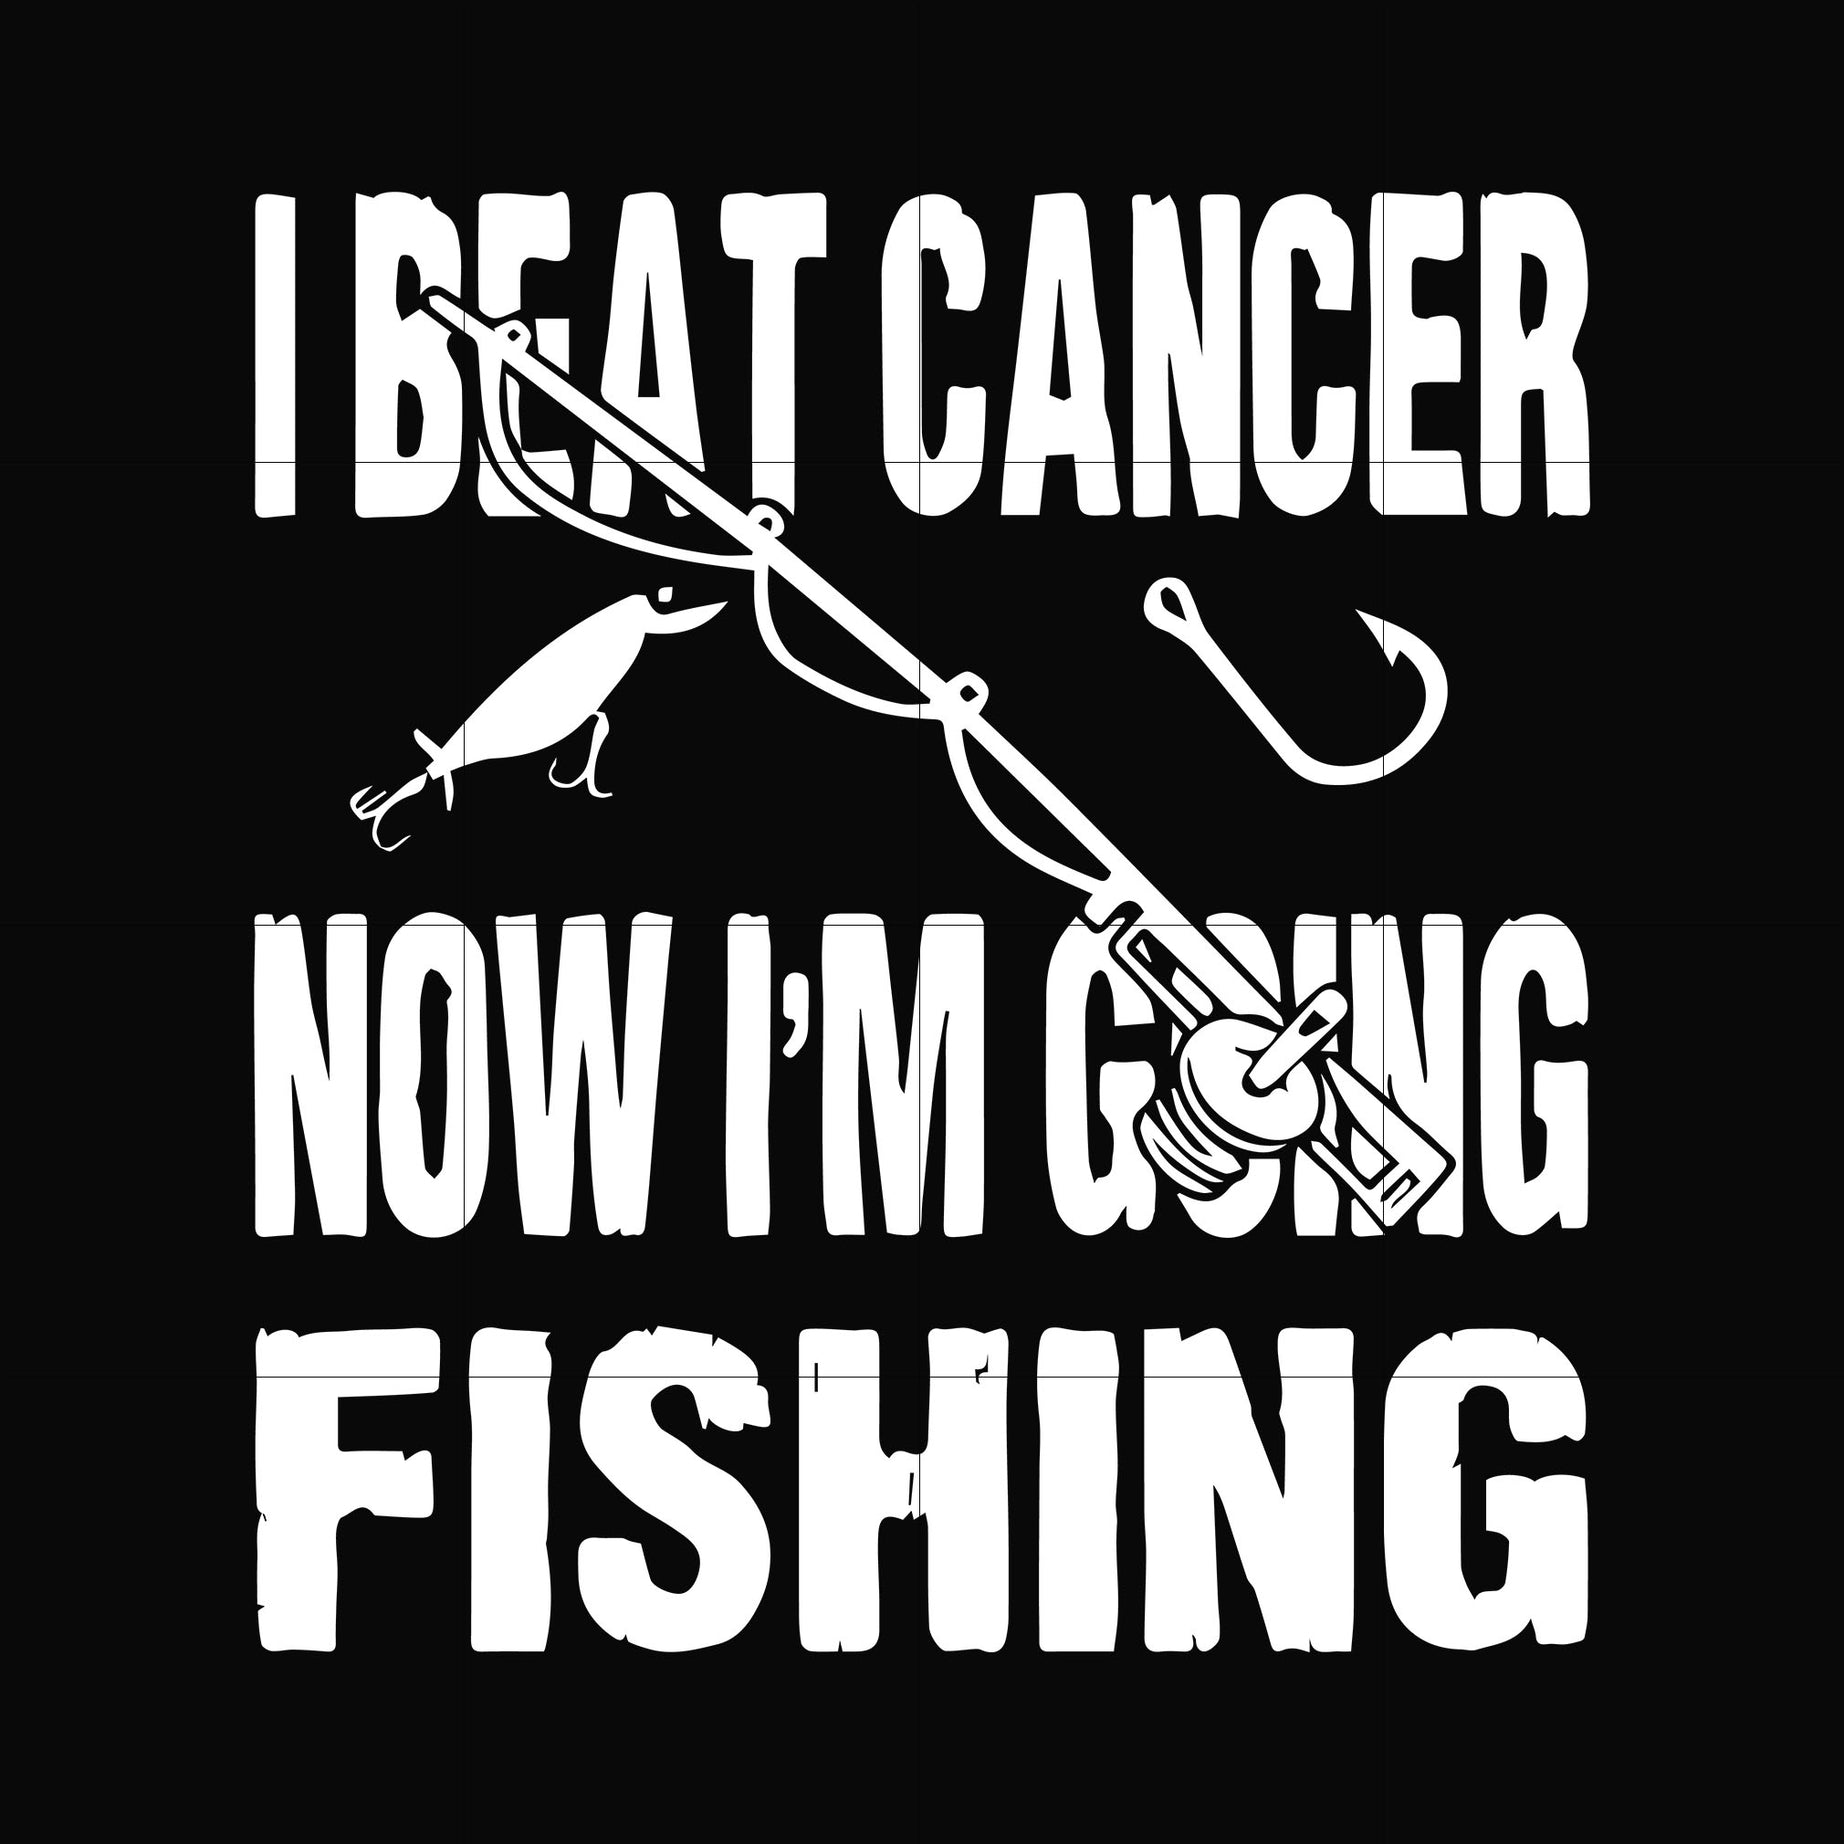 I beat cancer now I'm going fishing svg, png, dxf, eps digital file OTH0081